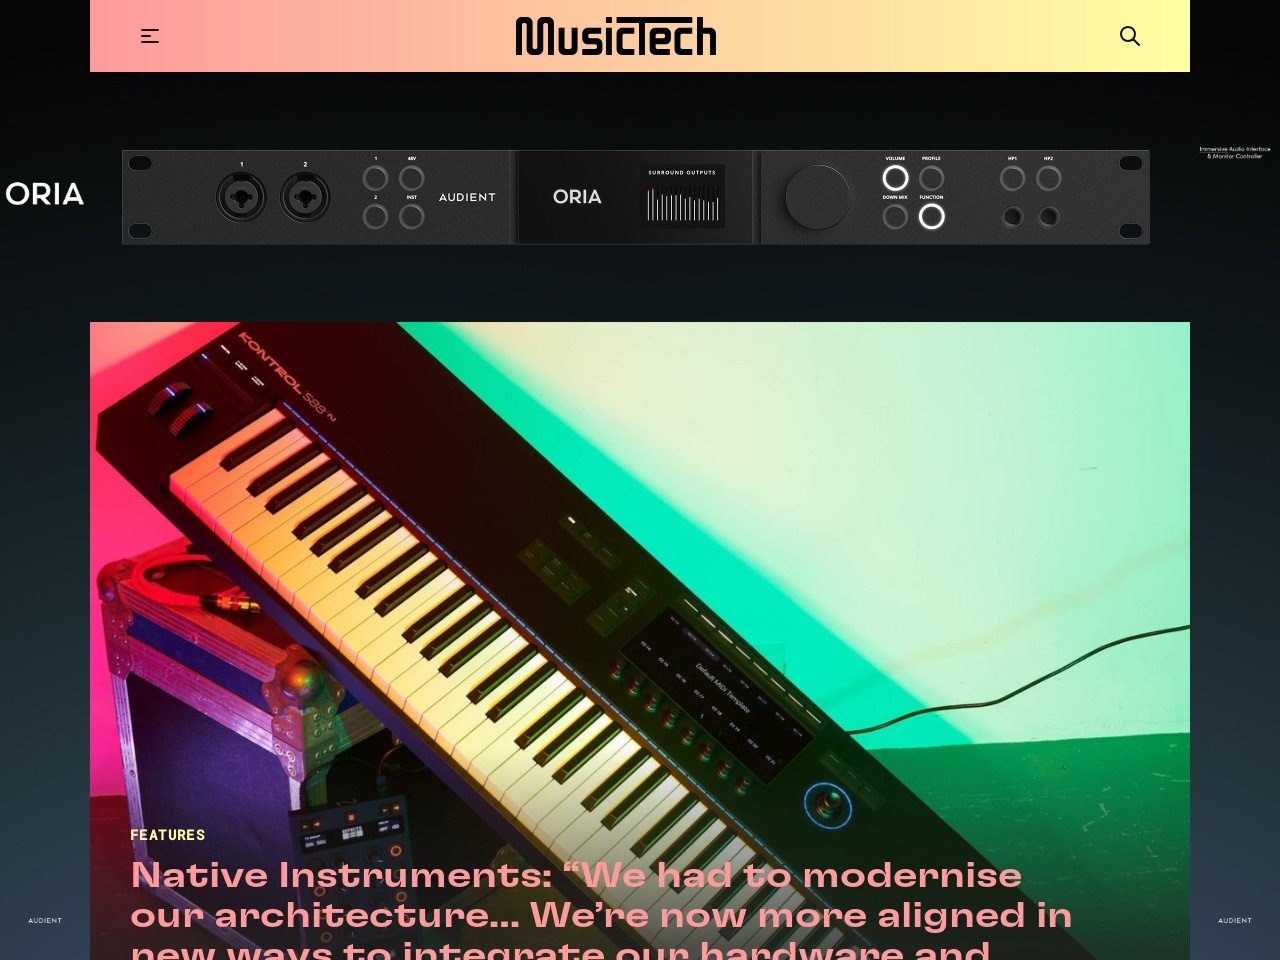 Native Instruments: “We had to modernise our architecture… We’re now more aligned in new ways to integrate our hardware and software"